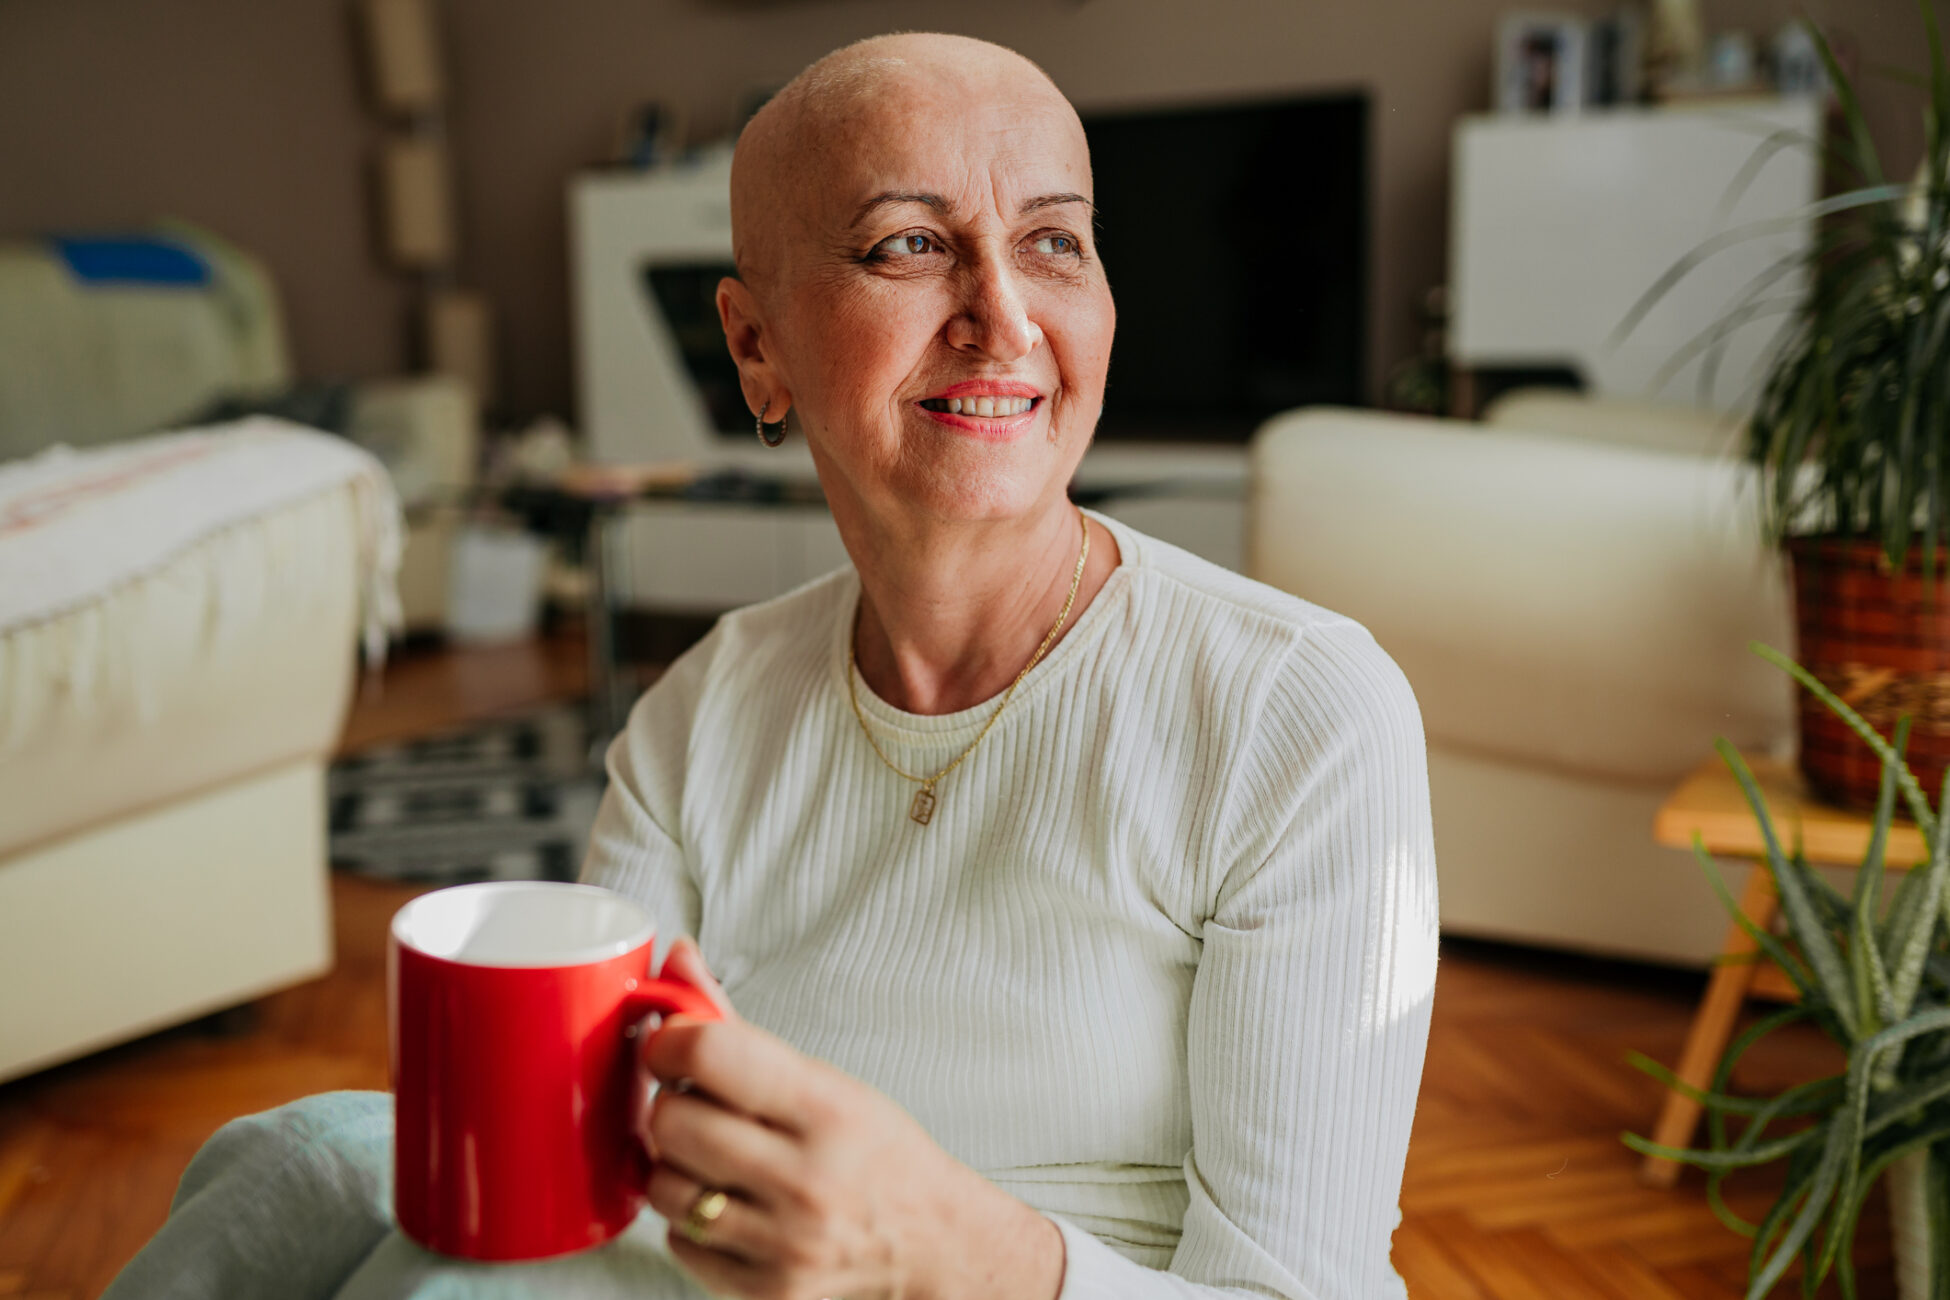 Cancer diagnosis hastens aging in women